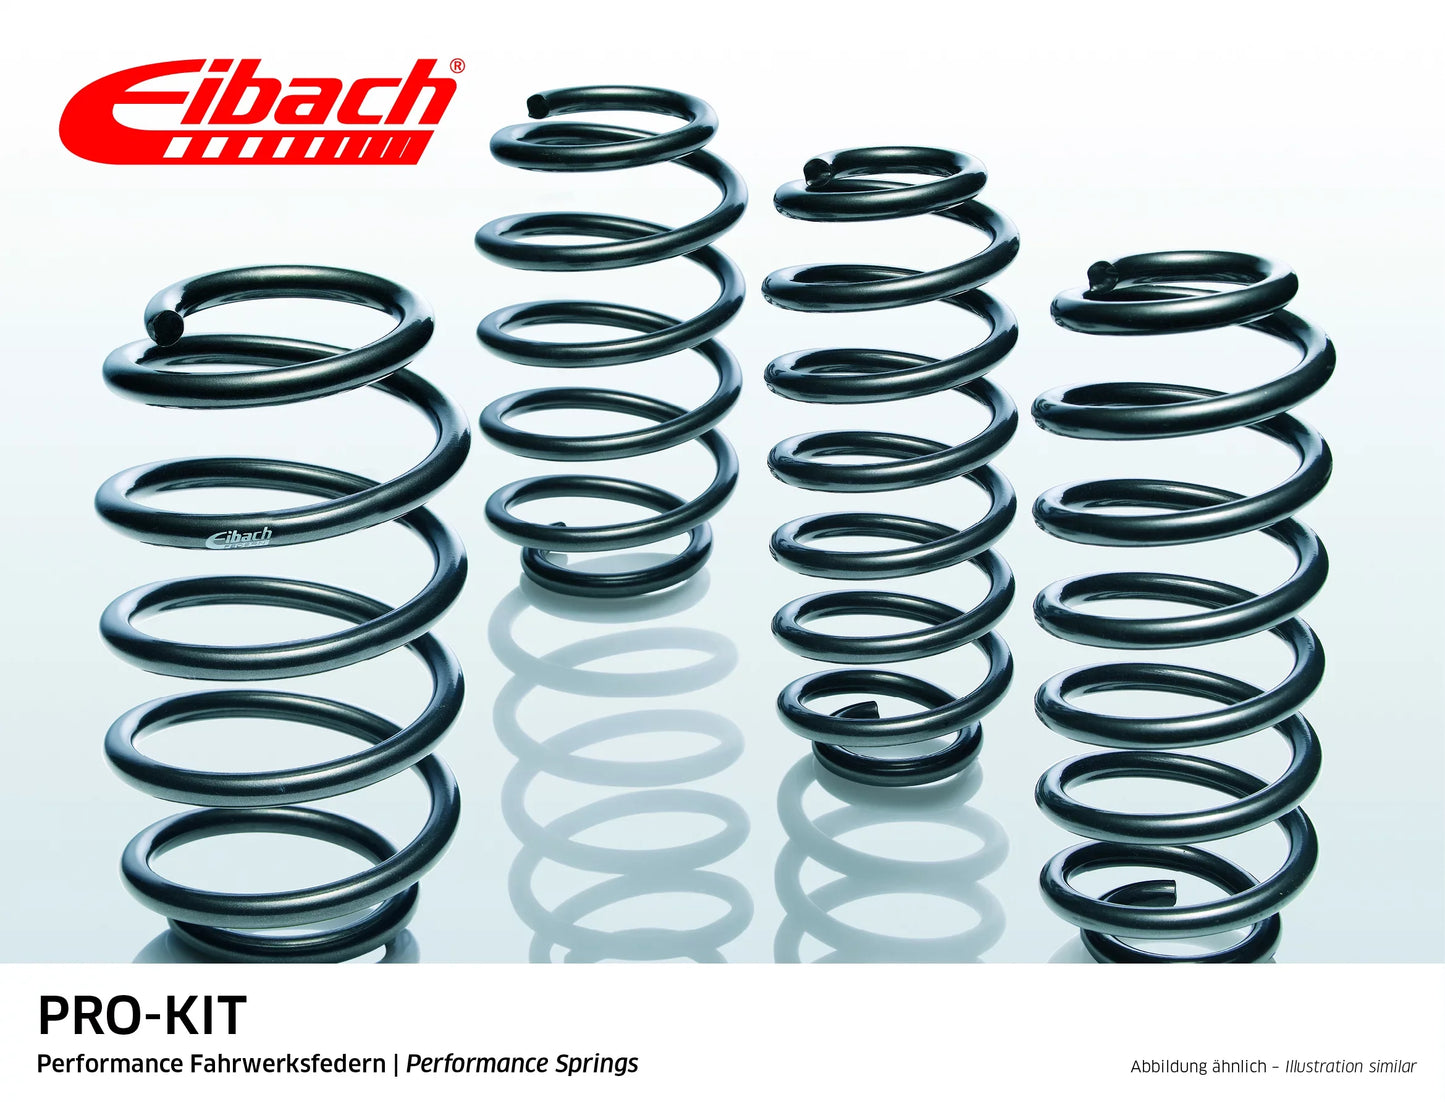 Eibach Pro-Kit Lowering Springs (E10-42-042-03-22) at £315.12